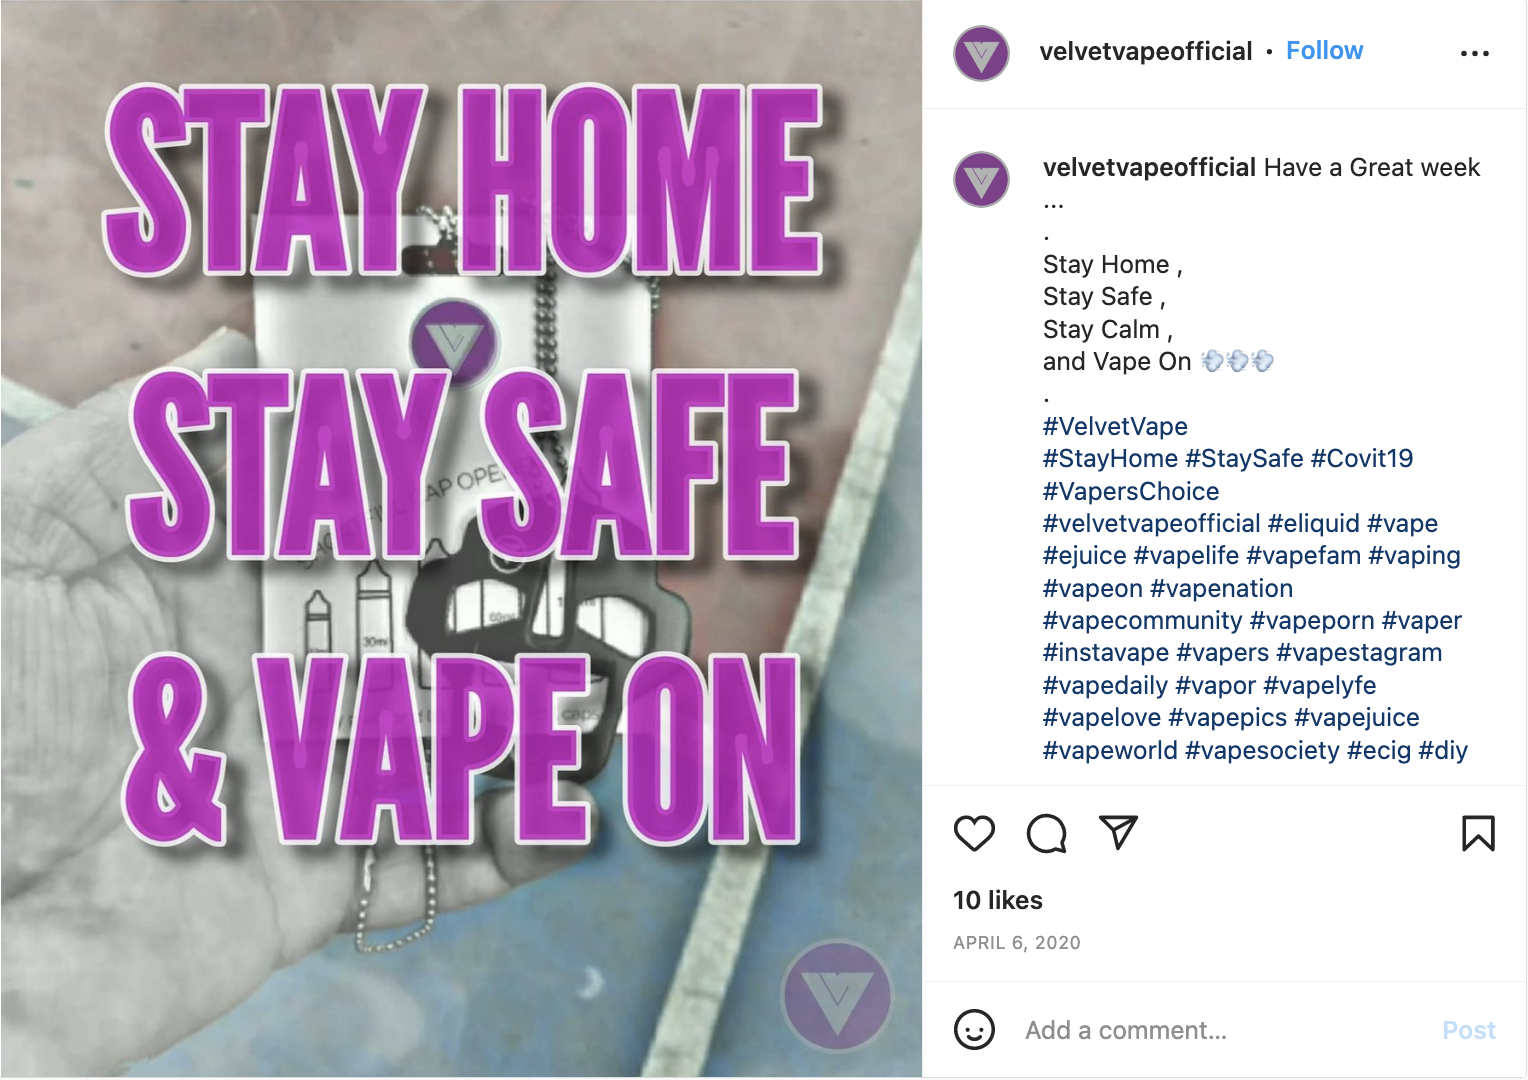 Stay home stay safe and vape on